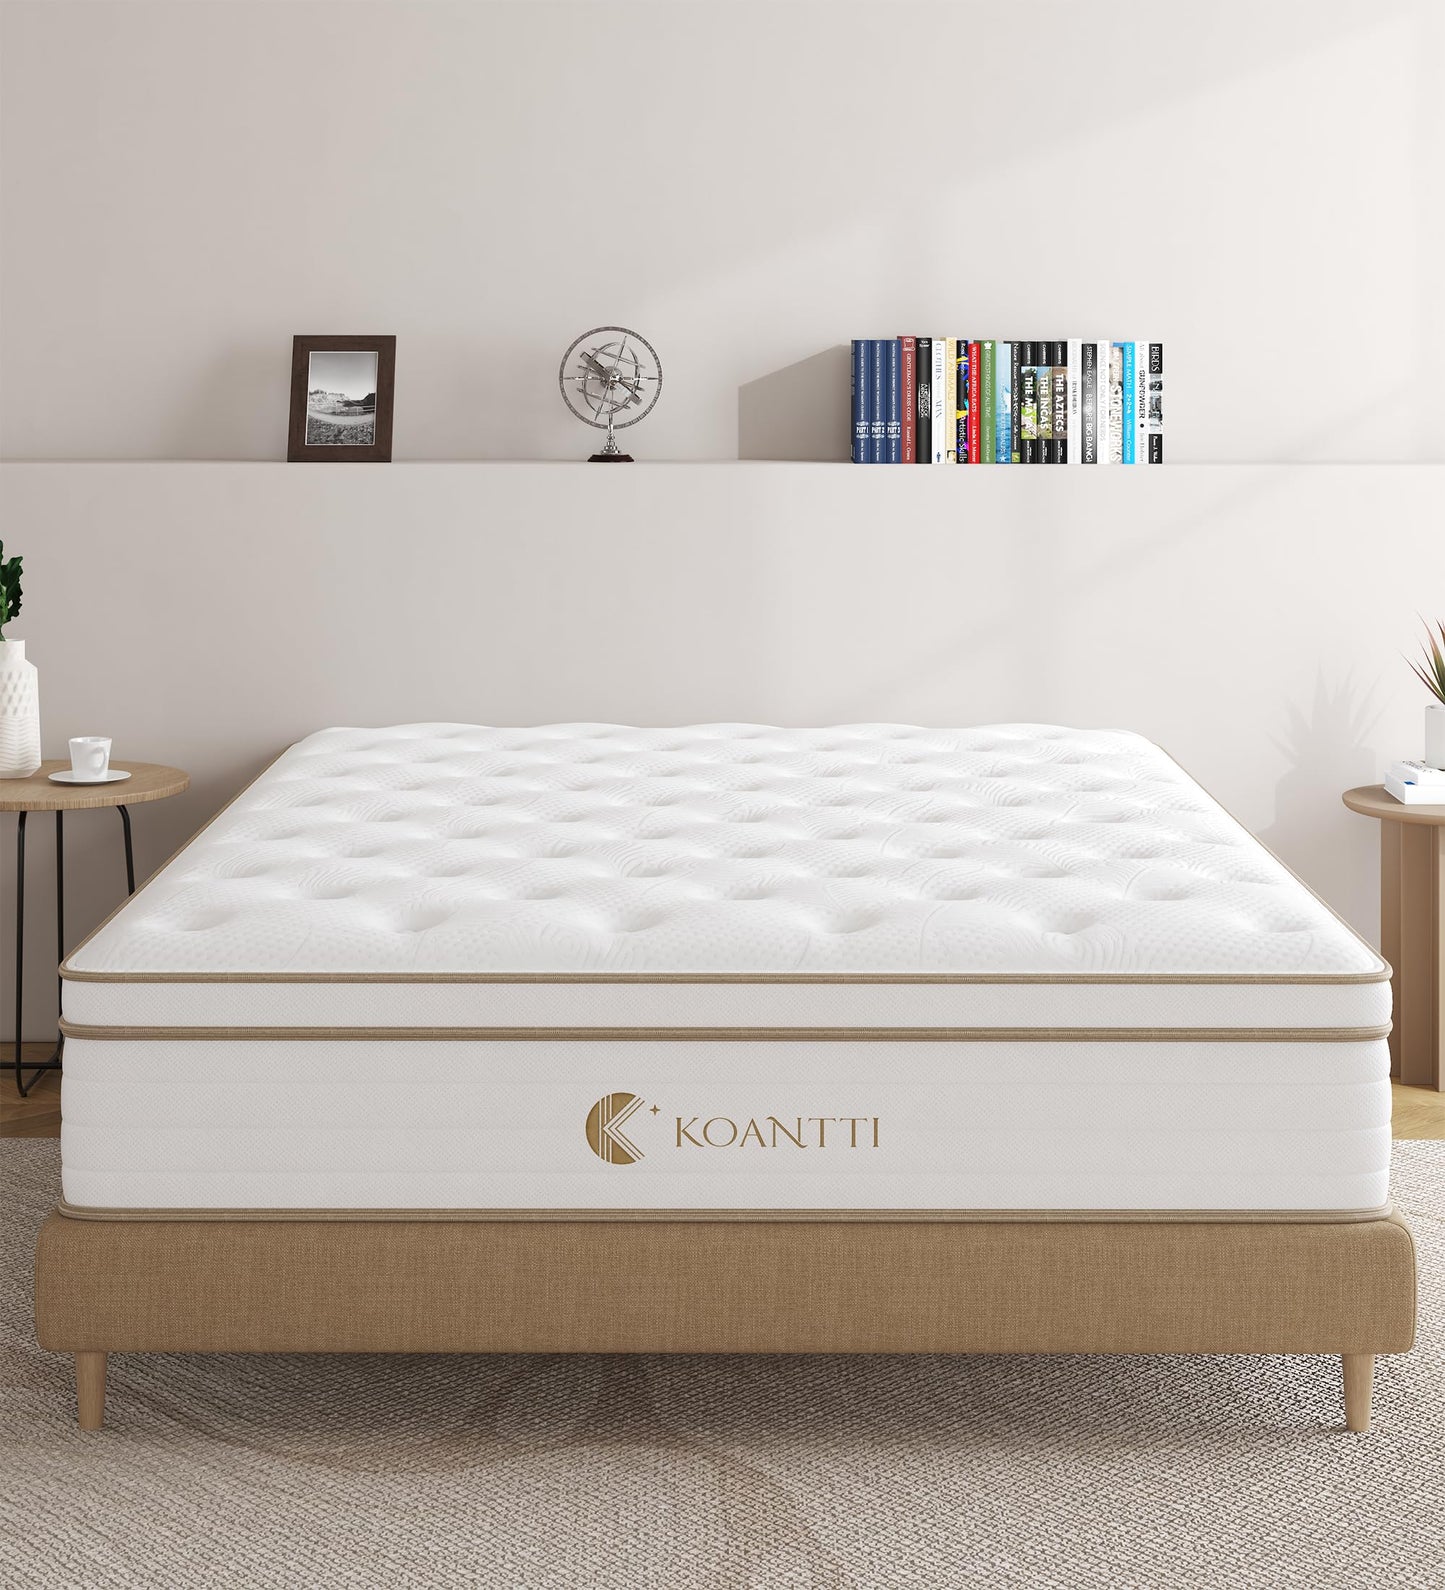 KOANTTI Queen Size Mattress,12 Inch Memory Foam Hybrid Mattress in a Box with Individual Pocket Spring,for Pressure Relief Motion Isolation Queen Size White Mattresses,CertiPUR-US.